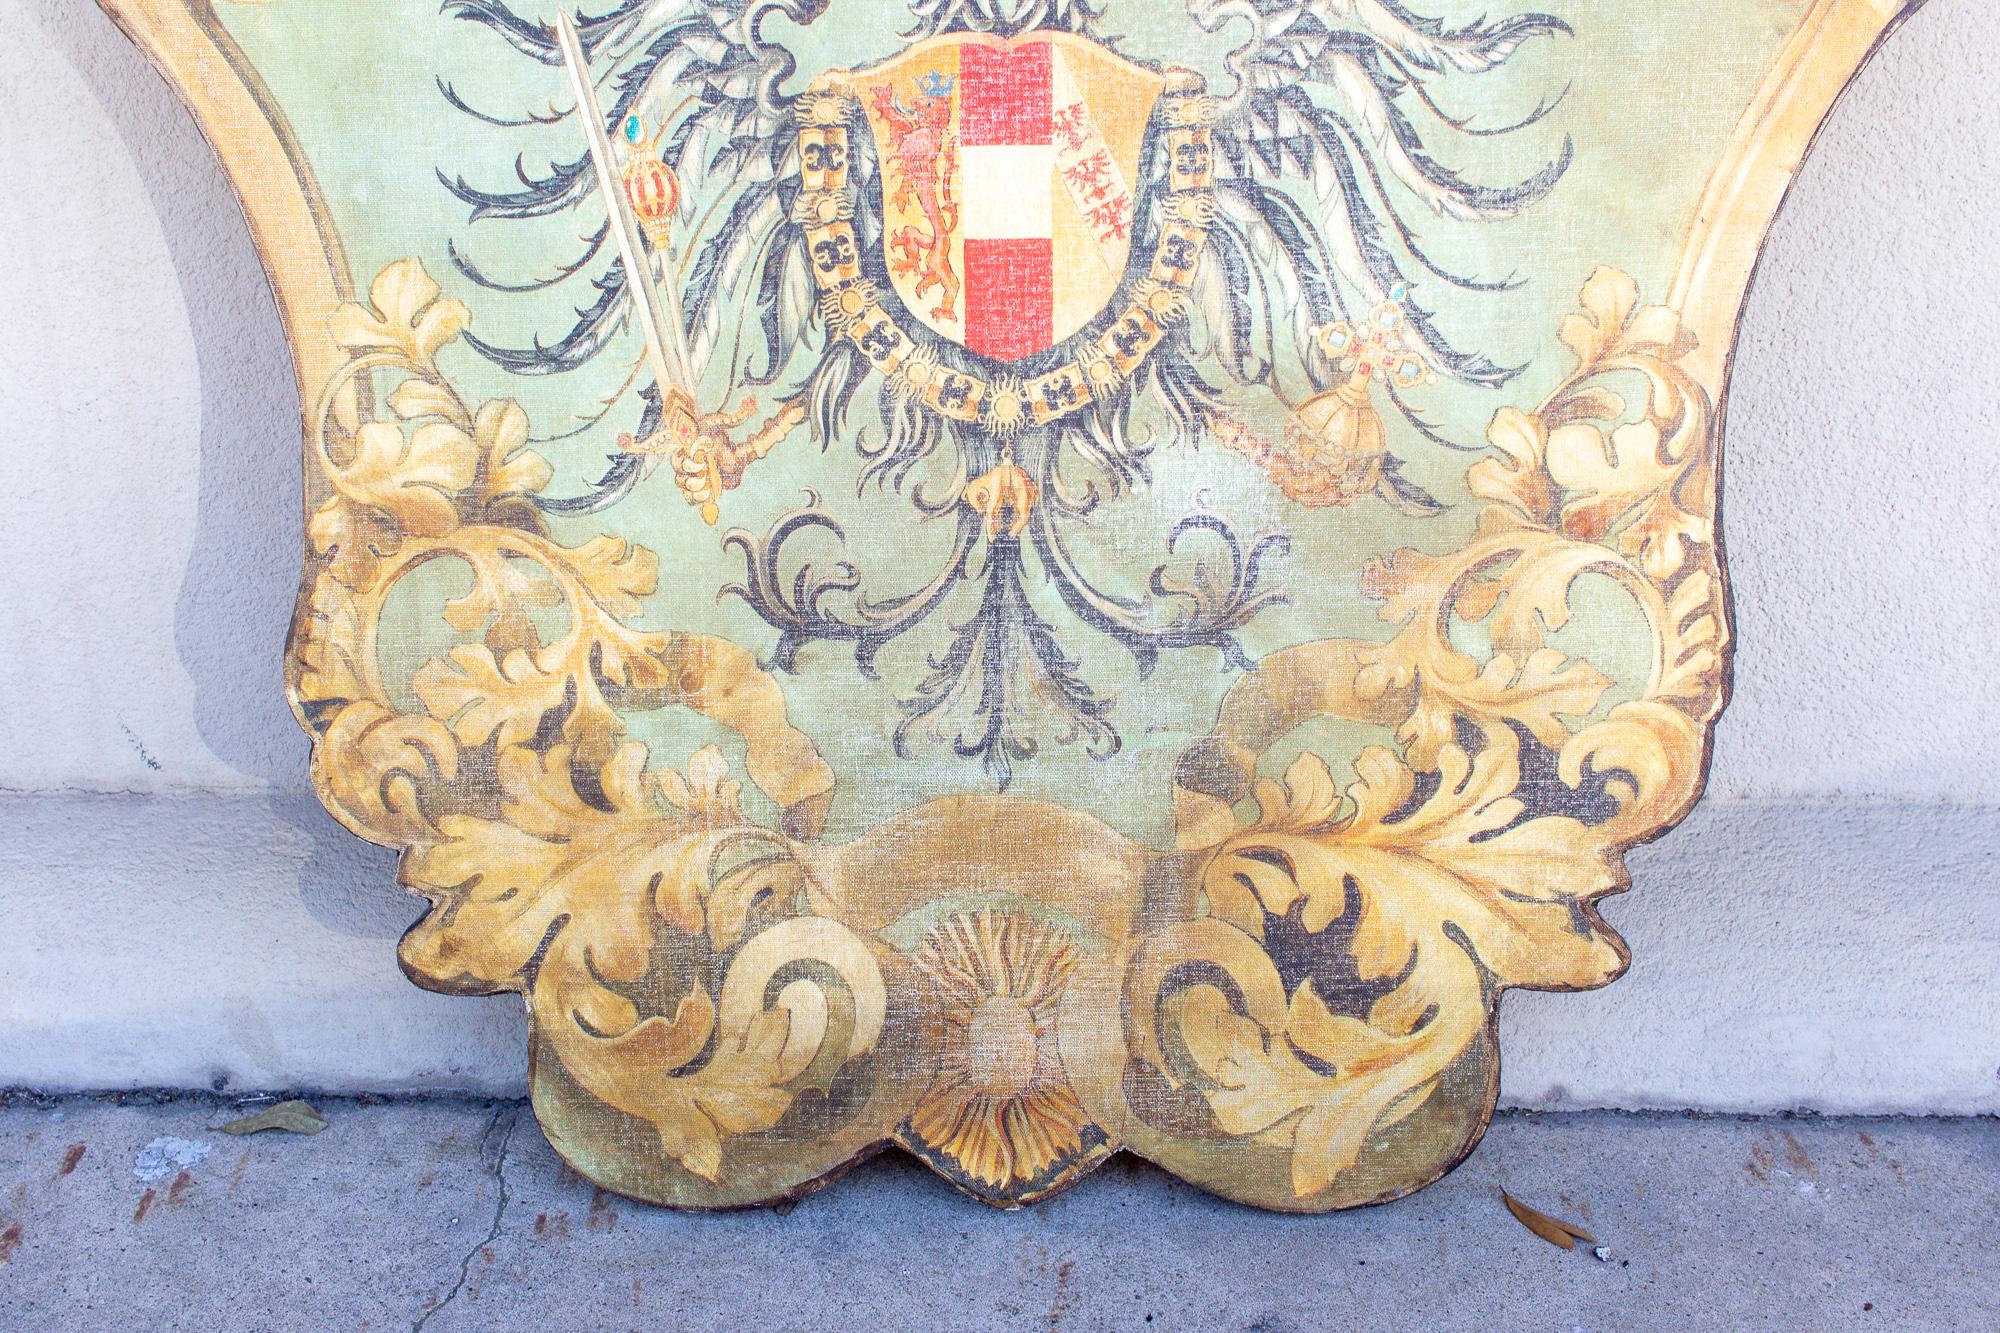 Hand-Painted Handmade Baronial Crest Plaque on Solid Wood